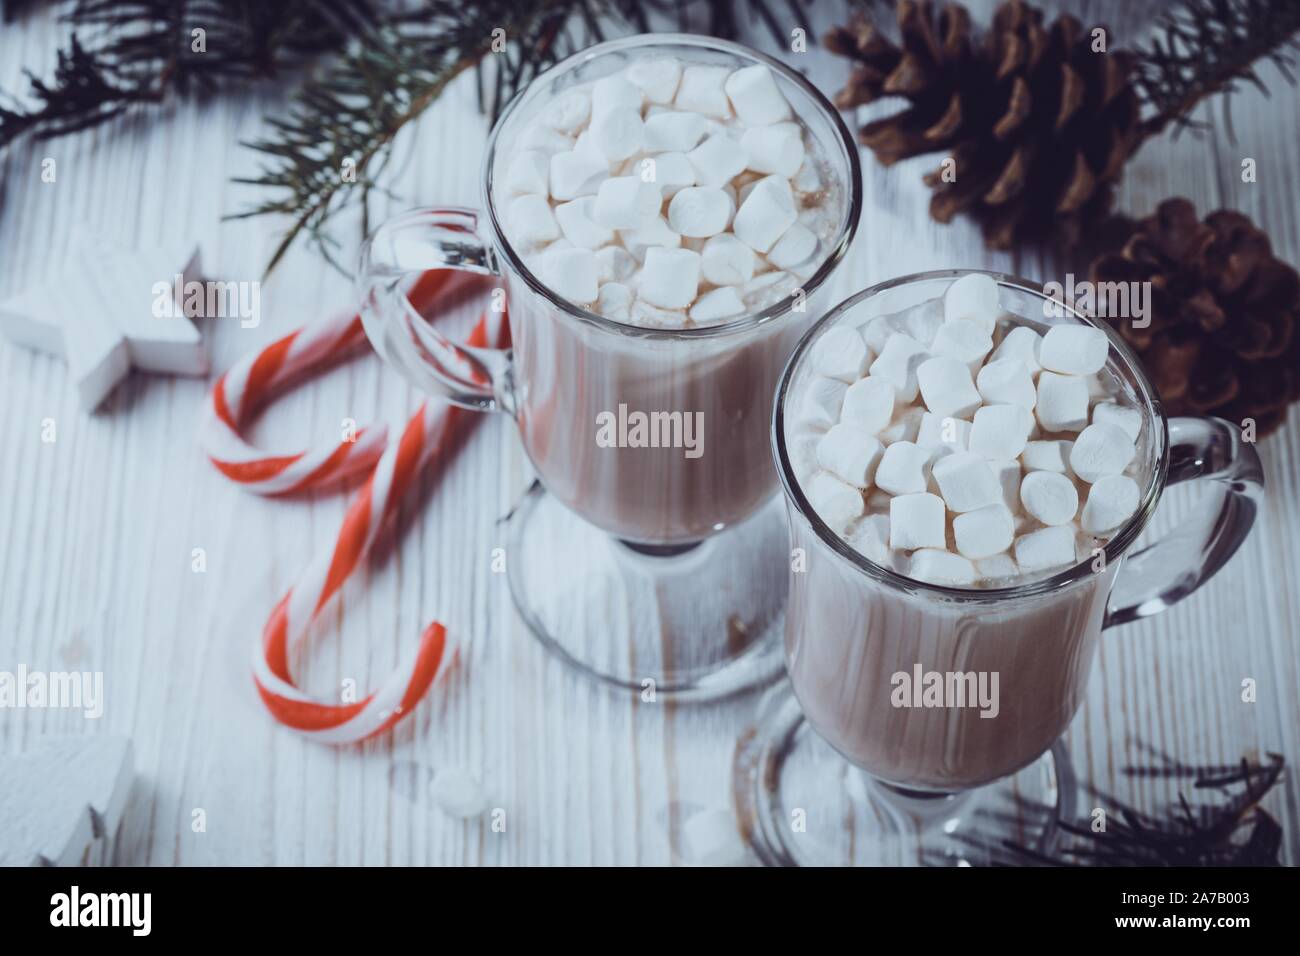 https://c8.alamy.com/comp/2A7B003/cup-of-coffee-with-marshmallows-and-candy-cane-2A7B003.jpg